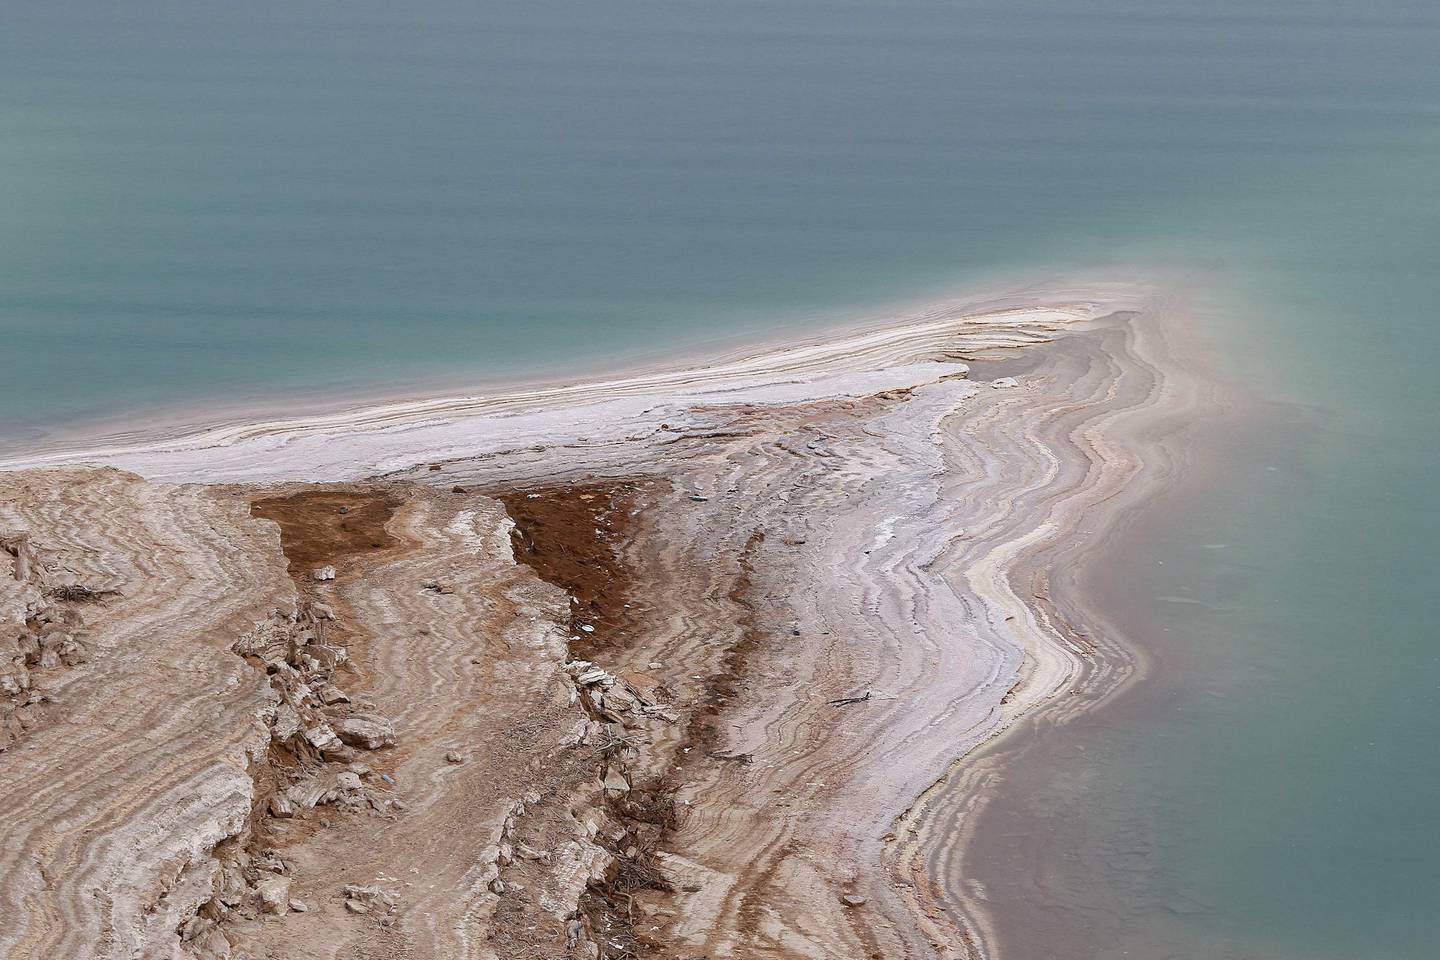 Part of the Dead Sea, as seen from Jordan last year, is dropping dramatically in elevation due to the severe drought.  AFP